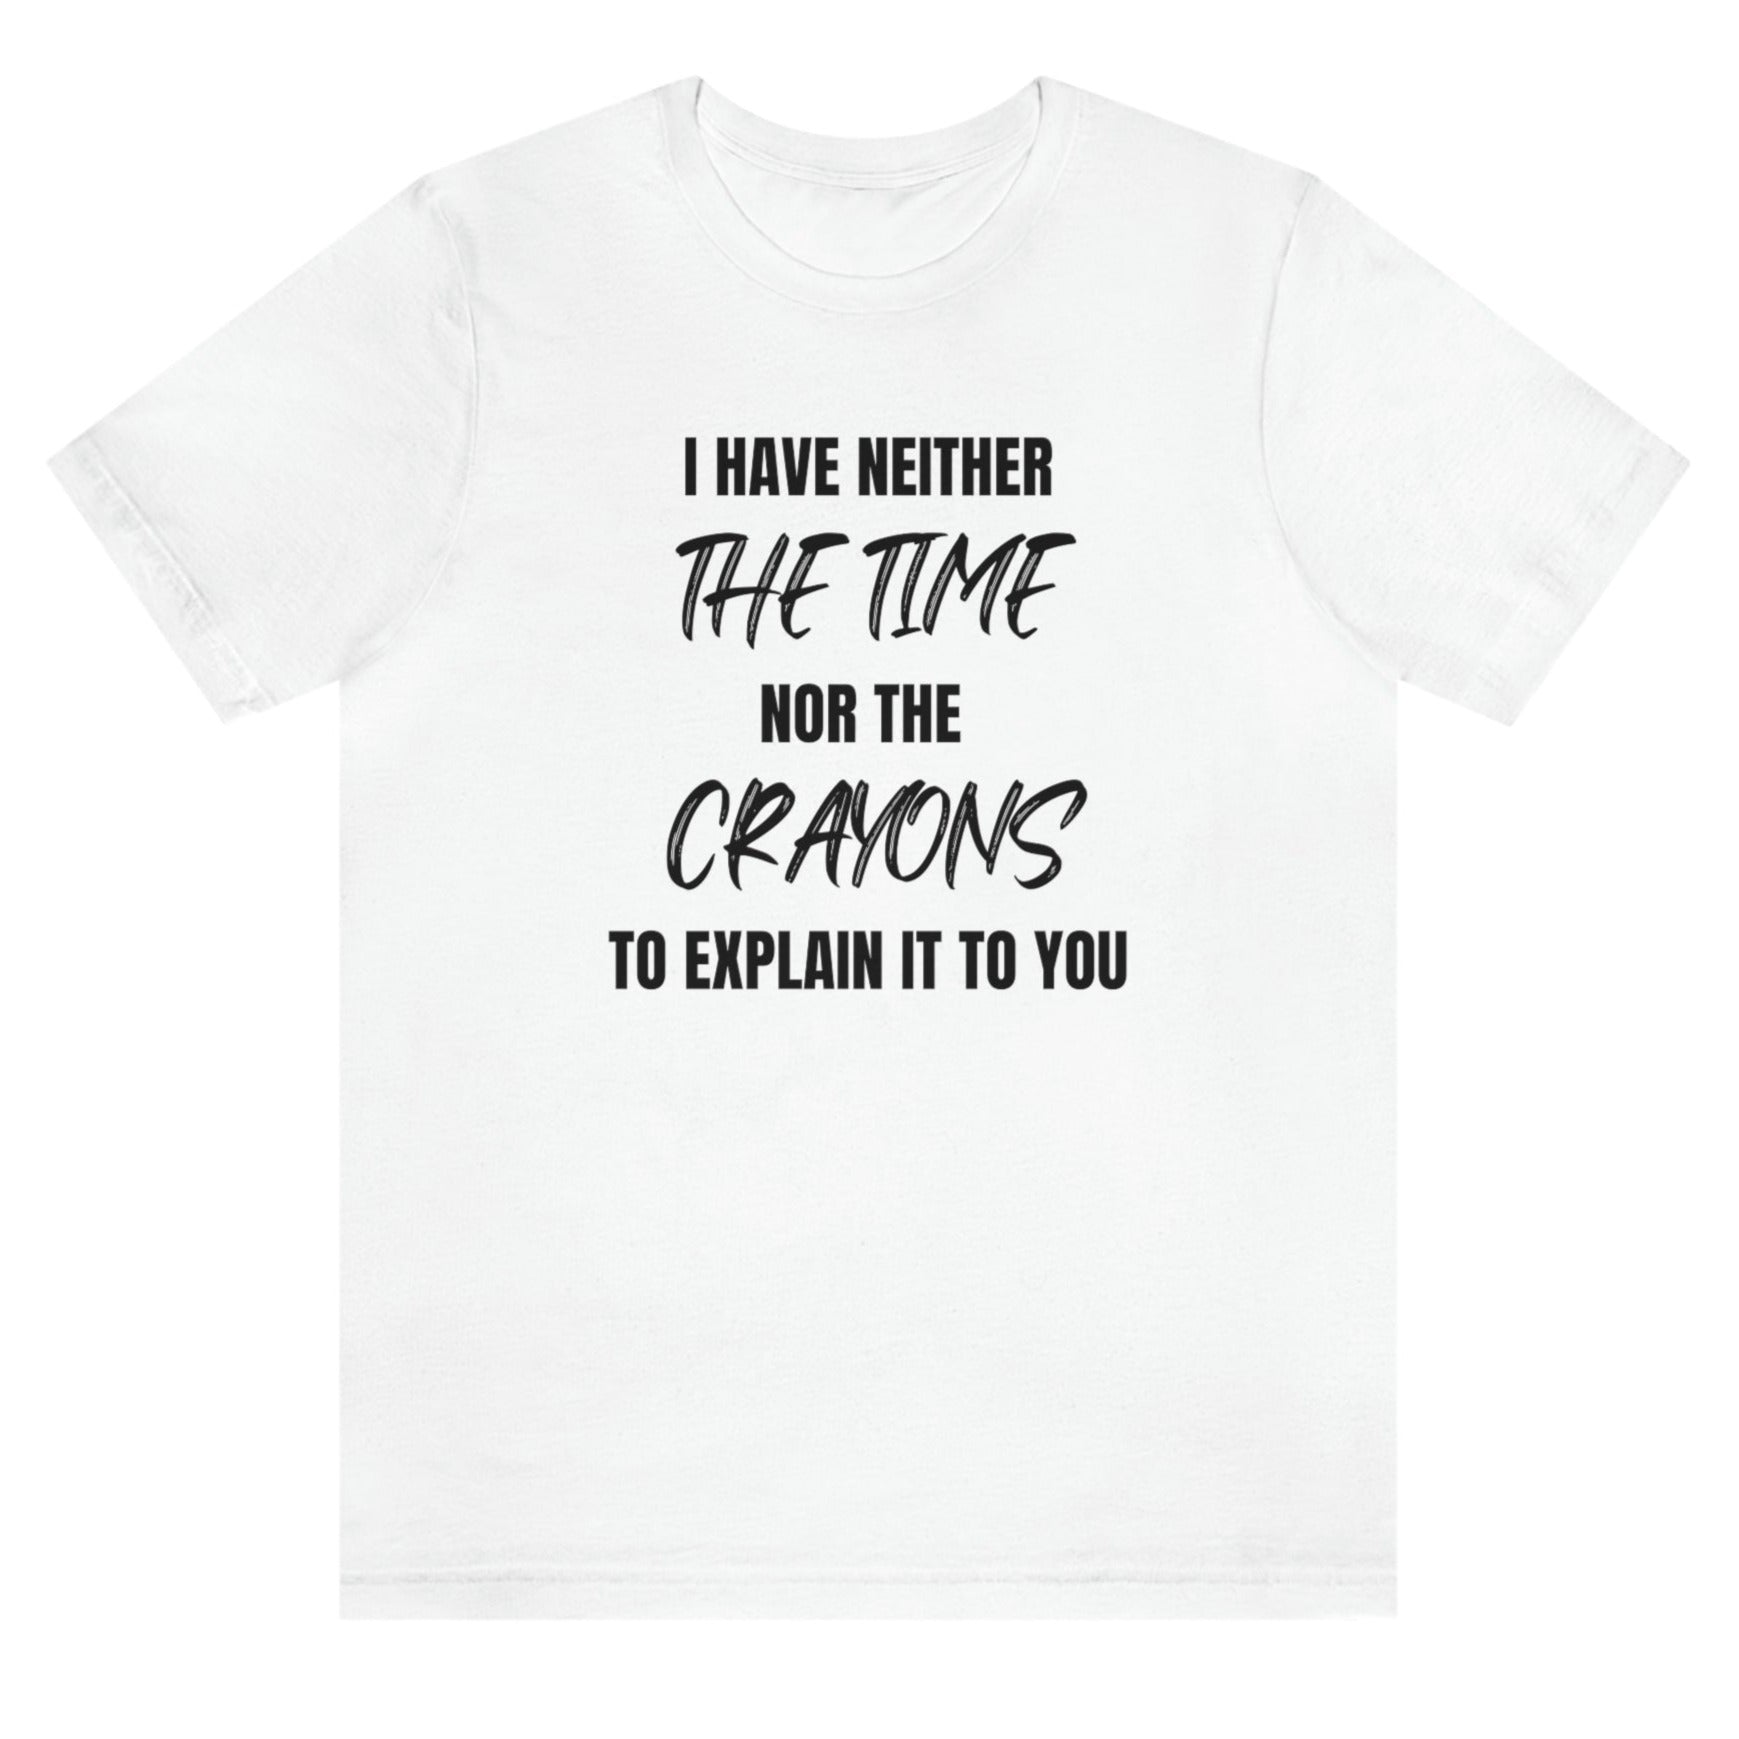 i-have-neither-the-time-nor-the-crayons-to-explain-it-to-you-white-t-shirt-unisex